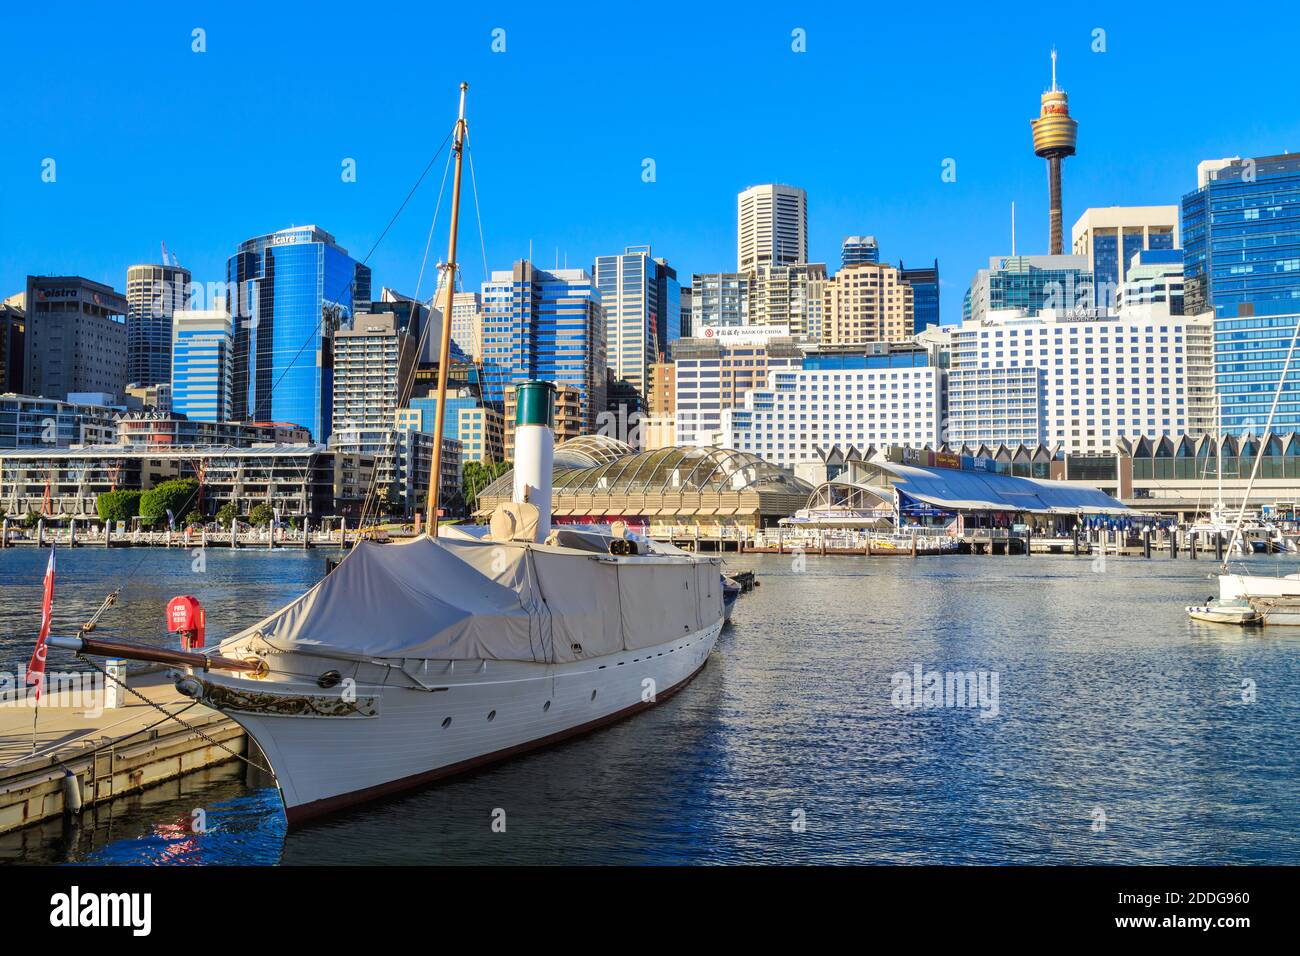 Darling Harbour, Sydney, Australia. The historic steam yacht 'Ena' (built 1900) floats in the water with the Sydney skyline behind Stock Photo